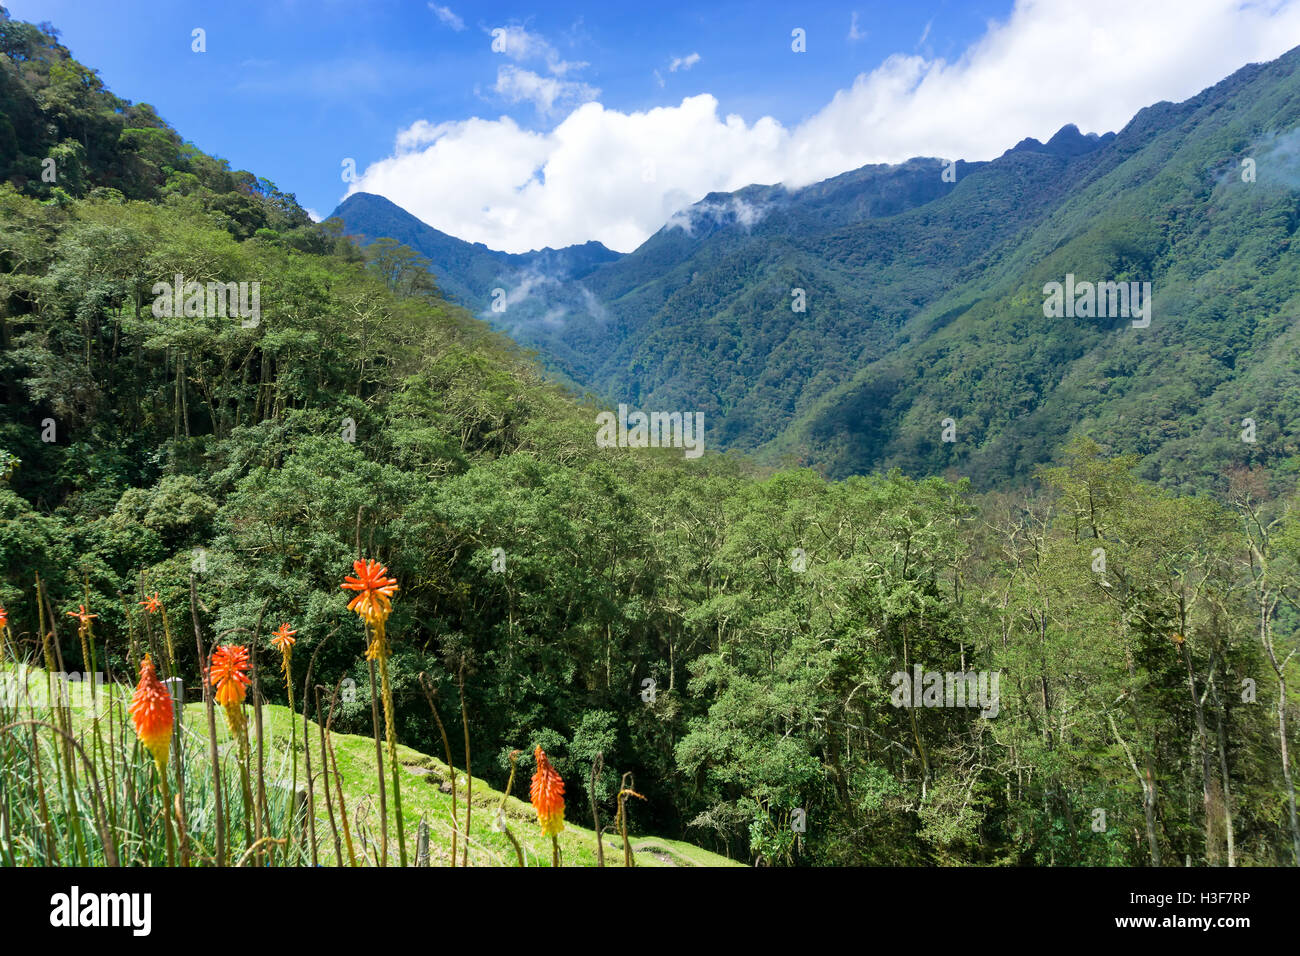 Landscape of cloud forest in Cocora Valley near Salento, Colombia Stock Photo